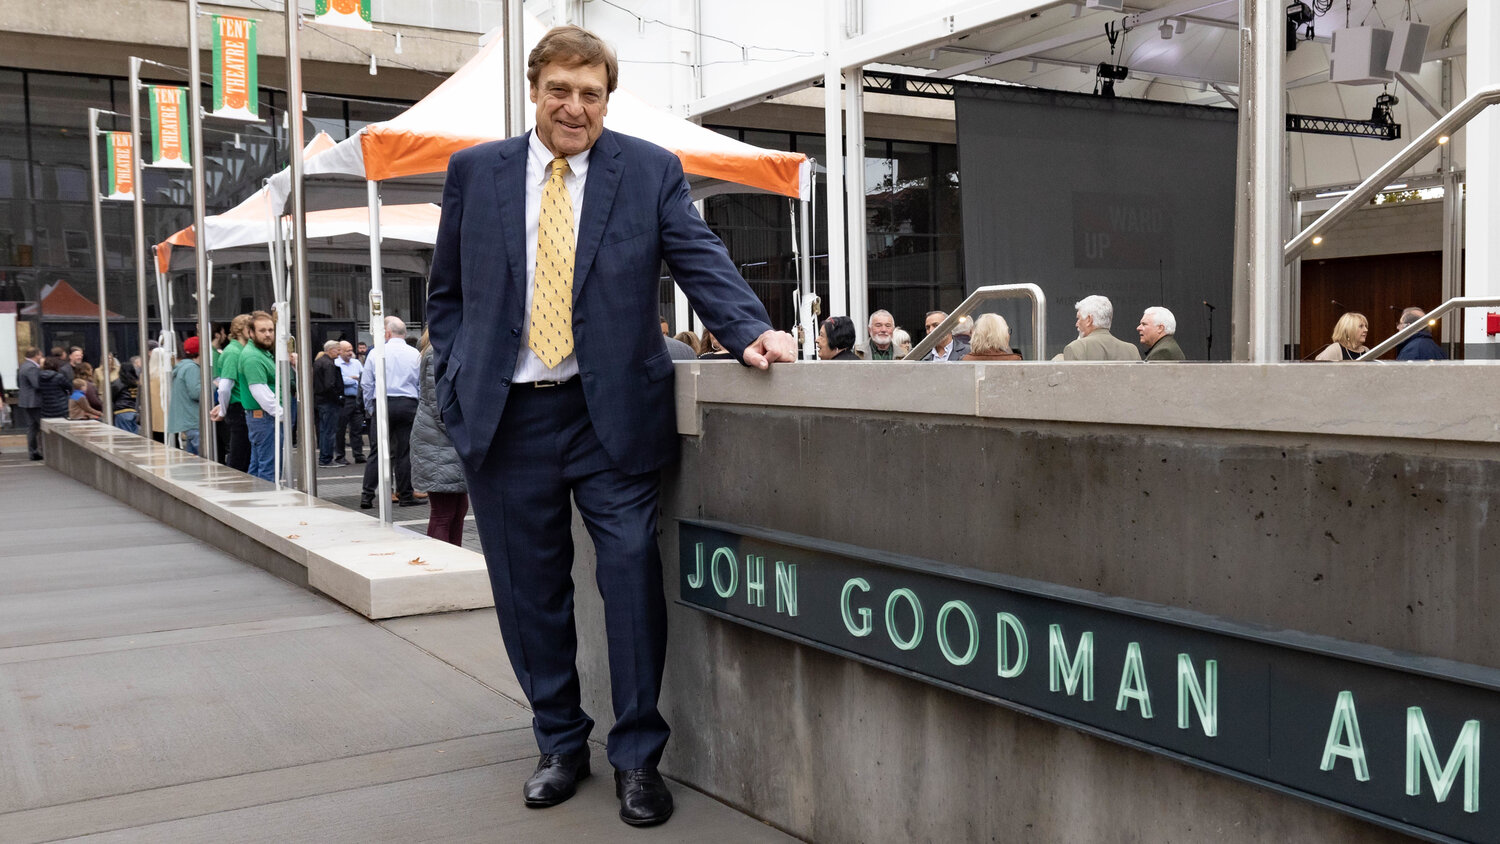 John Goodman is recognized for his work on a recent university capital campaign.